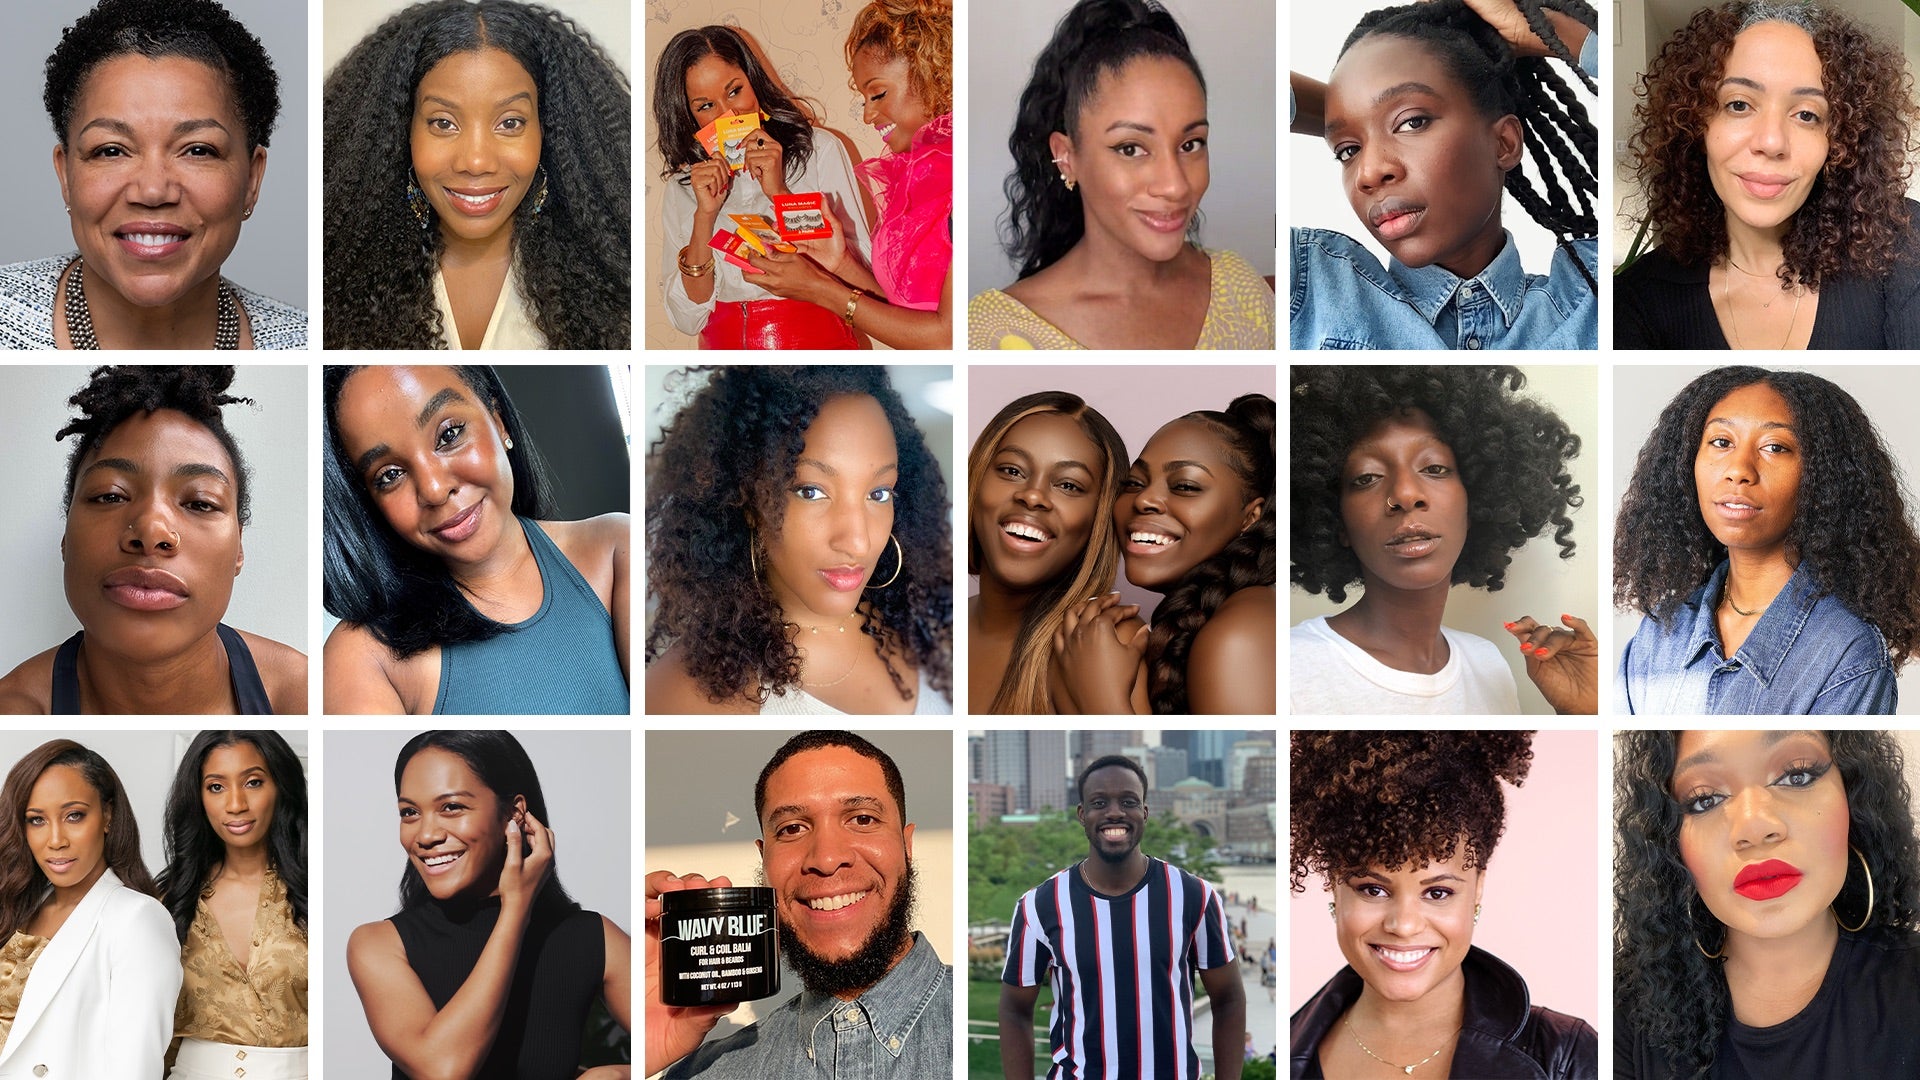 Meet The 16 Companies Selected To Receive Glossier's Black-Owned Beauty Business Grant